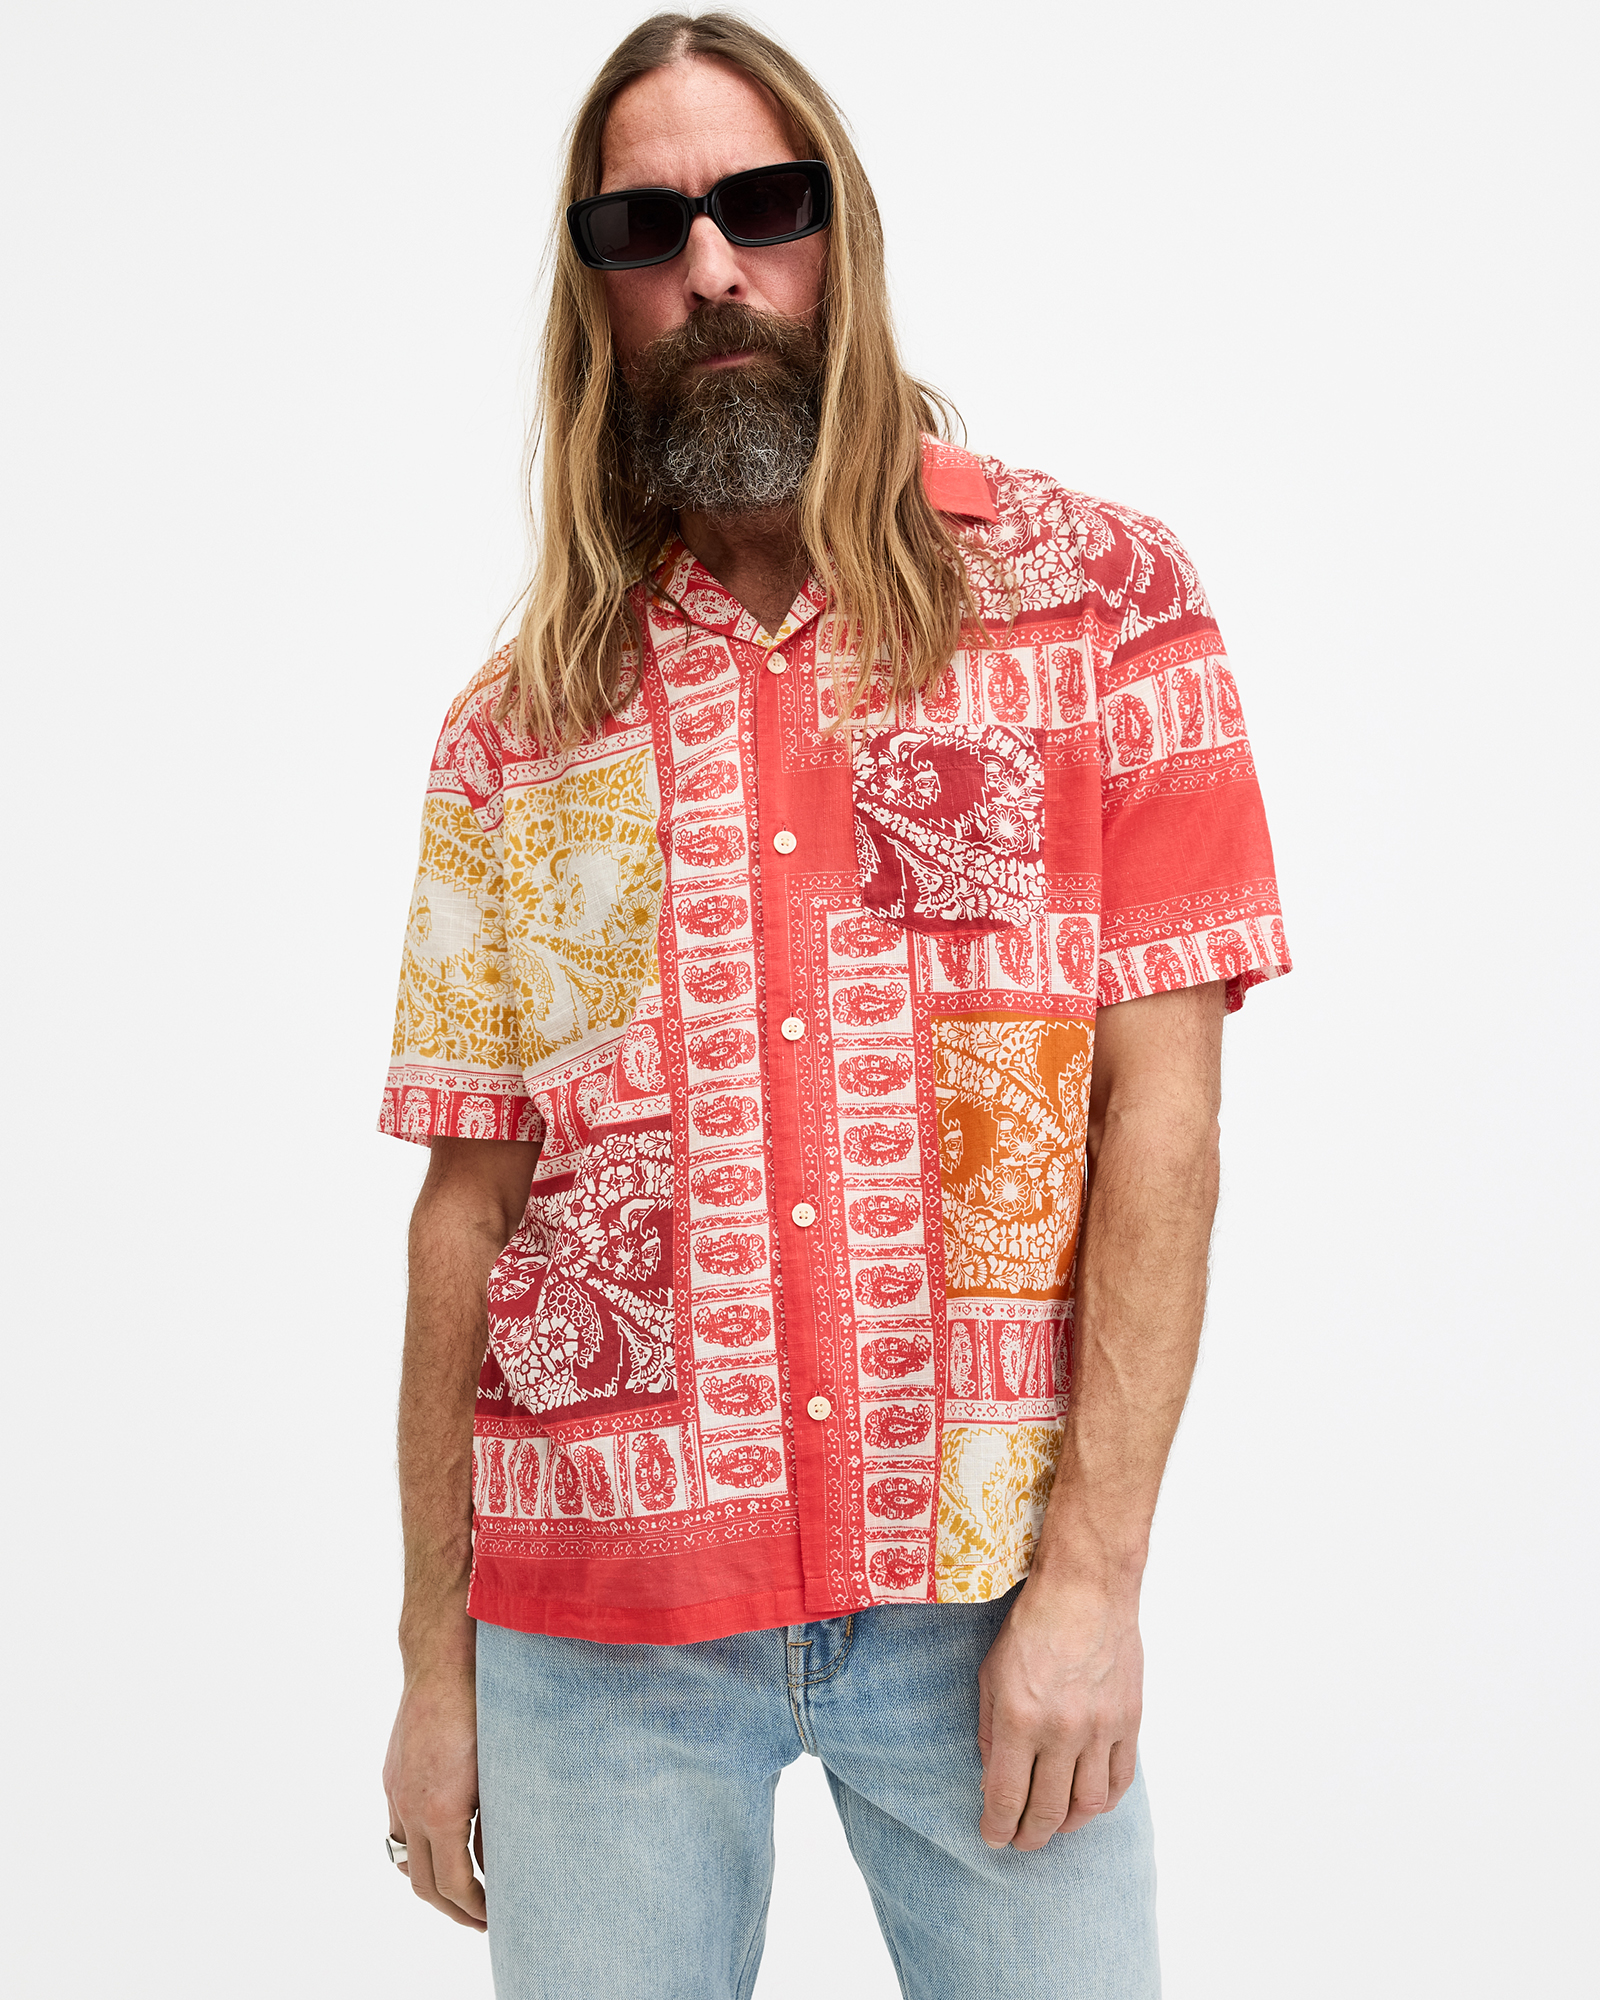 AllSaints Marquee Paisley Print Relaxed Fit Shirt,, ELECTRIC RED